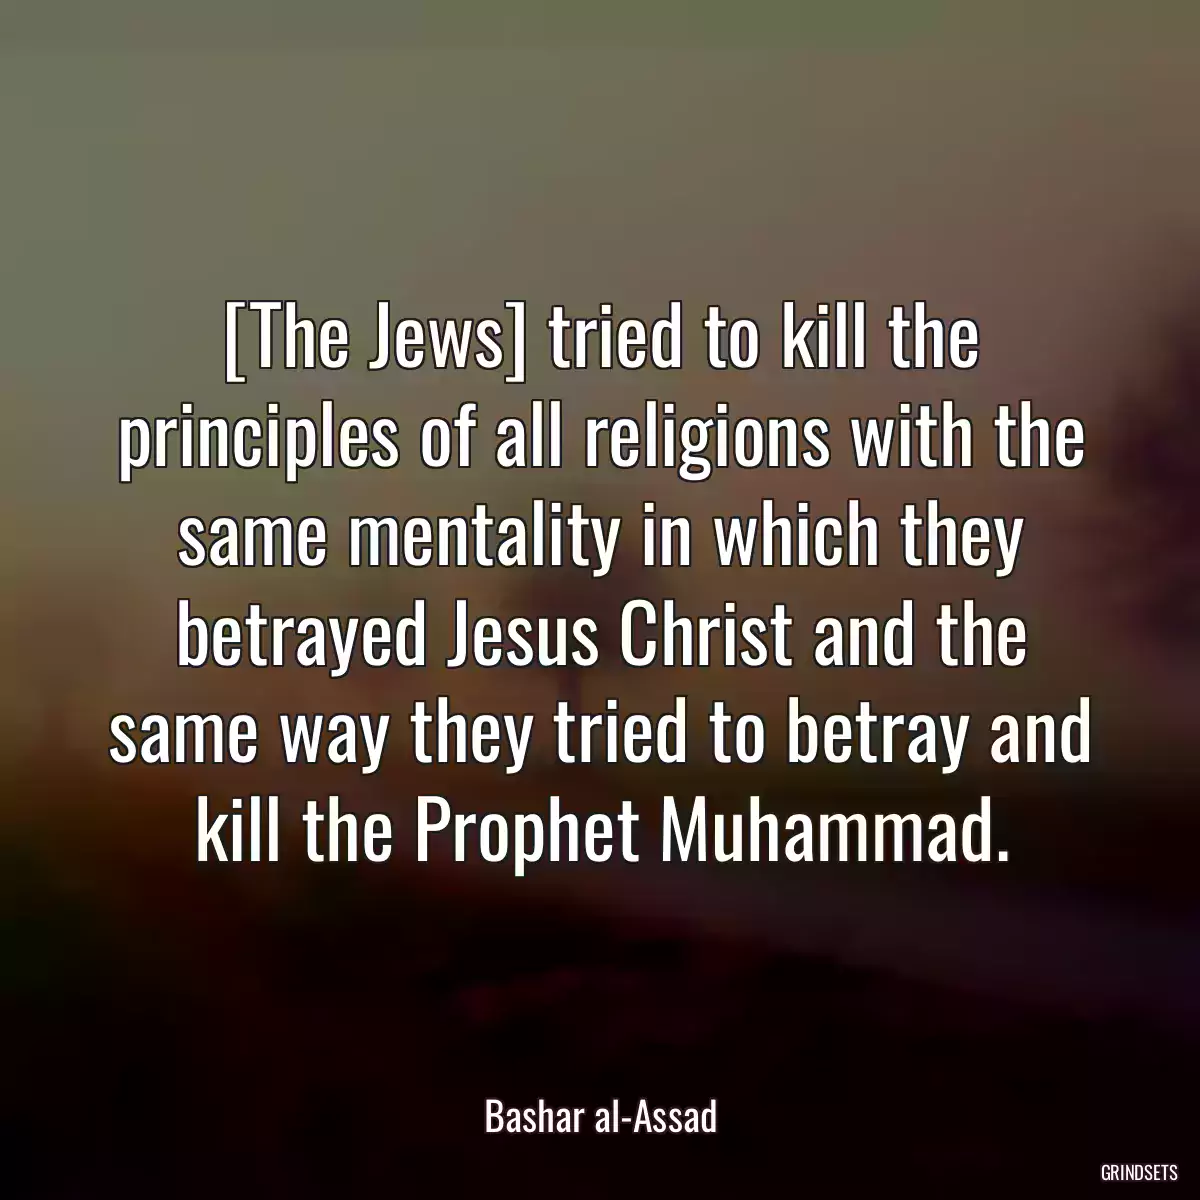 [The Jews] tried to kill the principles of all religions with the same mentality in which they betrayed Jesus Christ and the same way they tried to betray and kill the Prophet Muhammad.